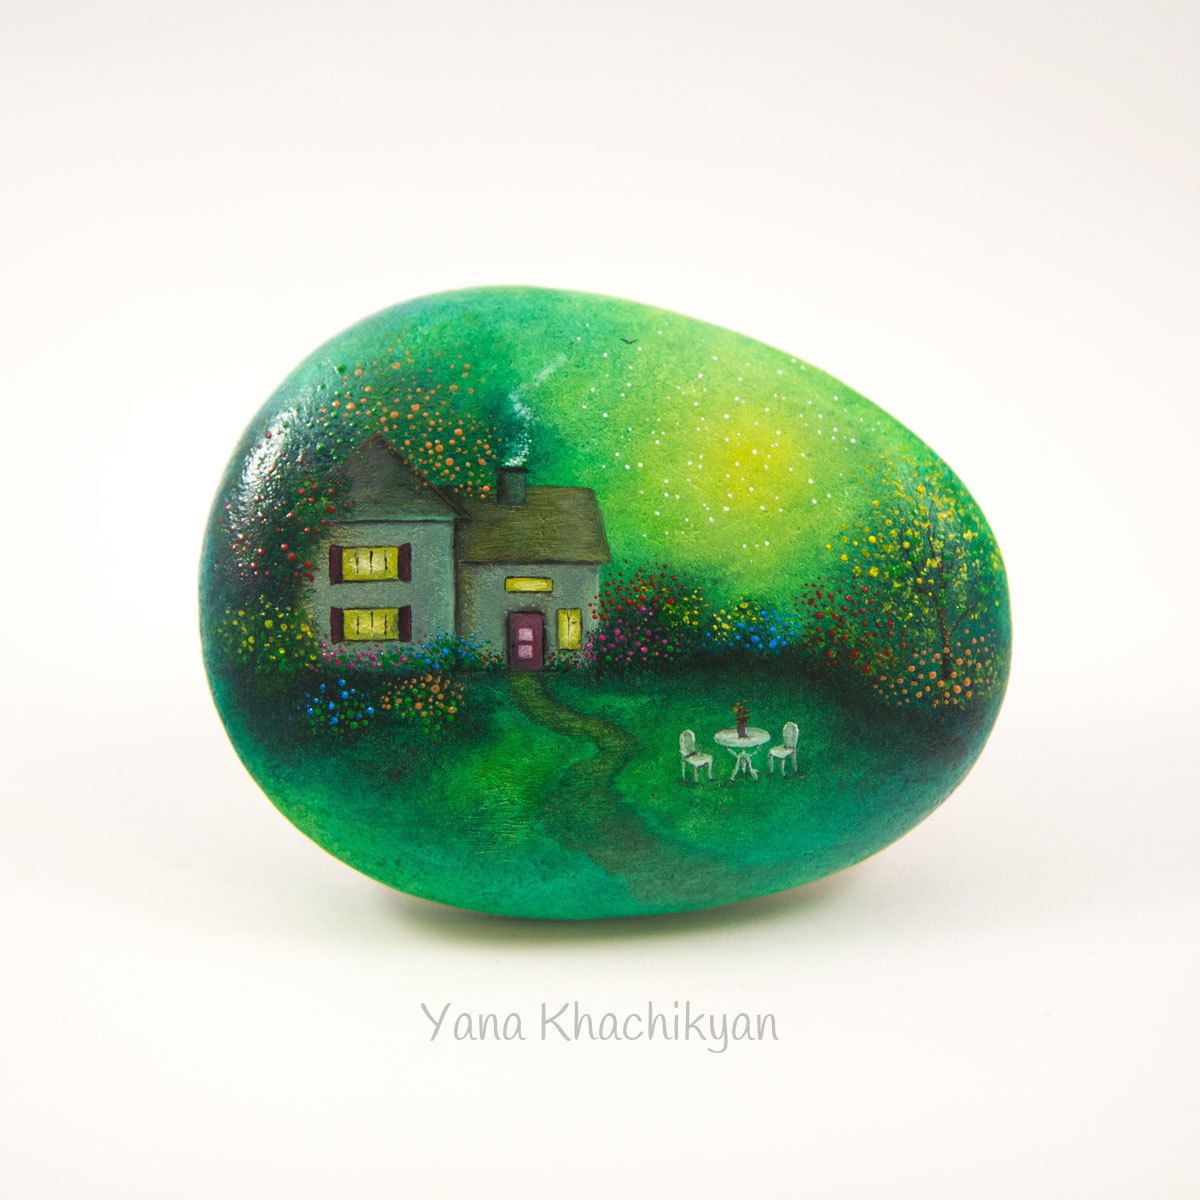 Miniature Worlds Of Tiny Creatures Painted On Stones By Yana Khachikyan 16